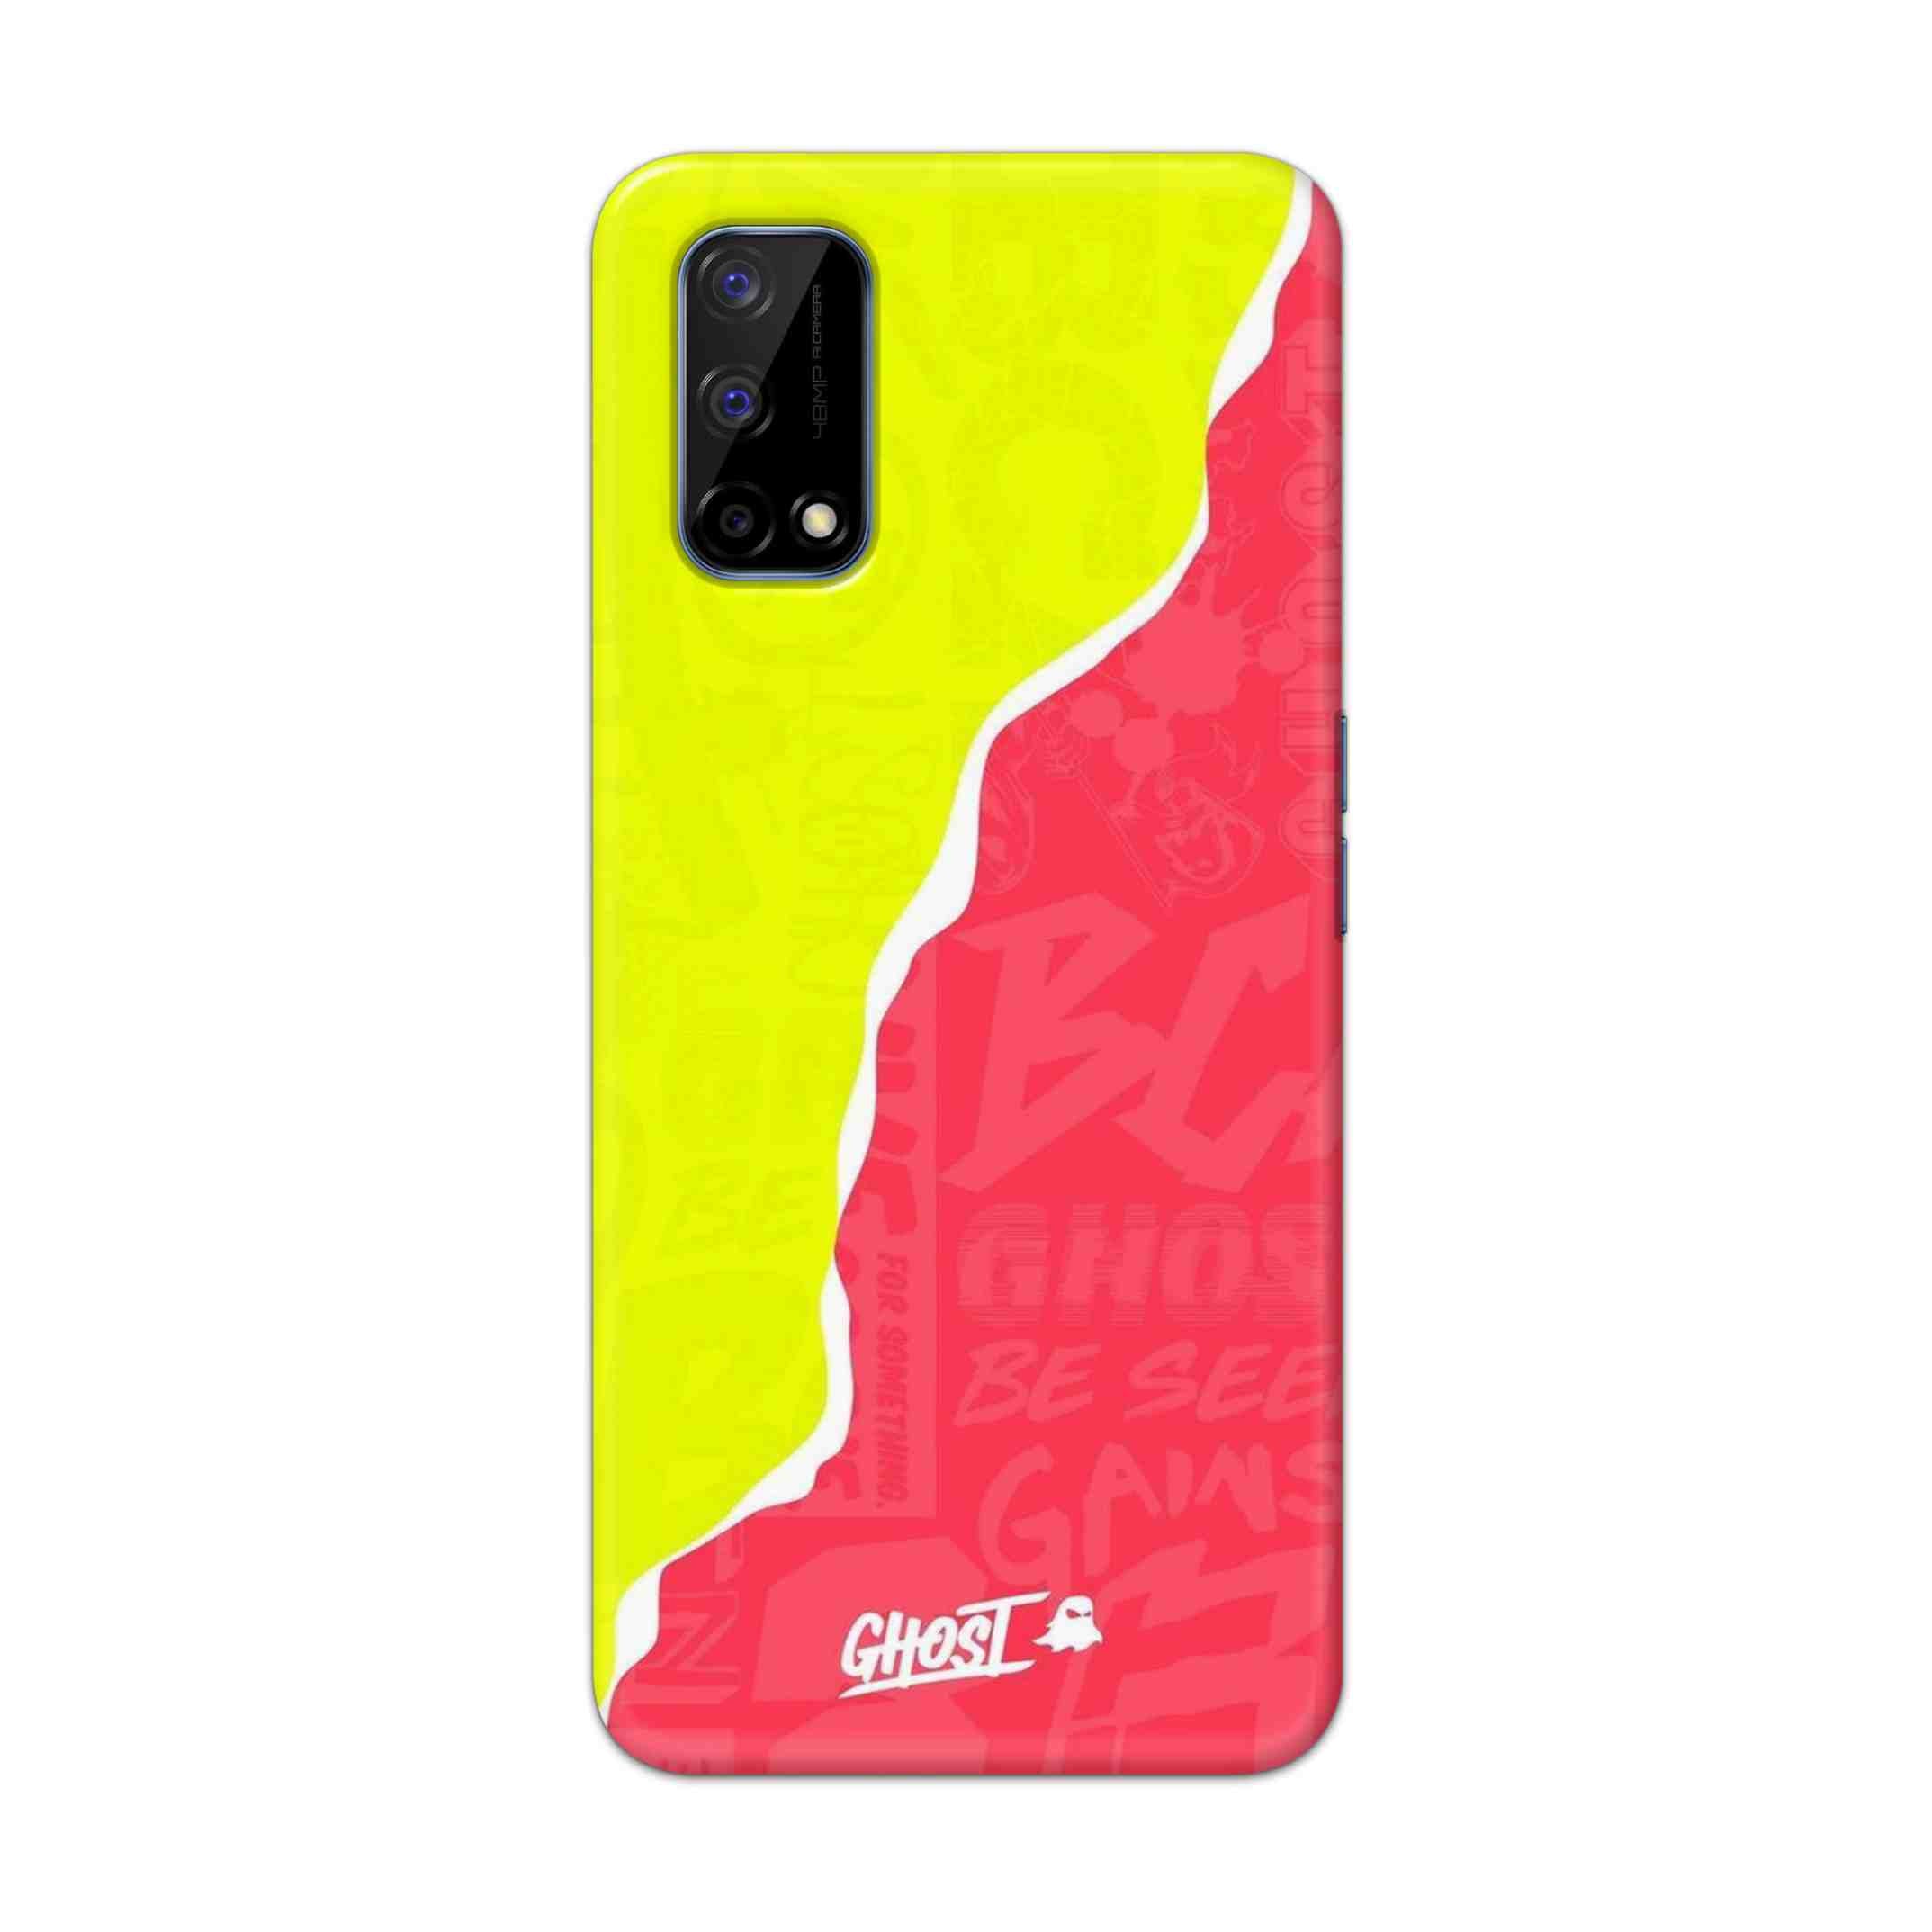 Buy Ghost Hard Back Mobile Phone Case Cover For Realme Narzo 30 Pro Online